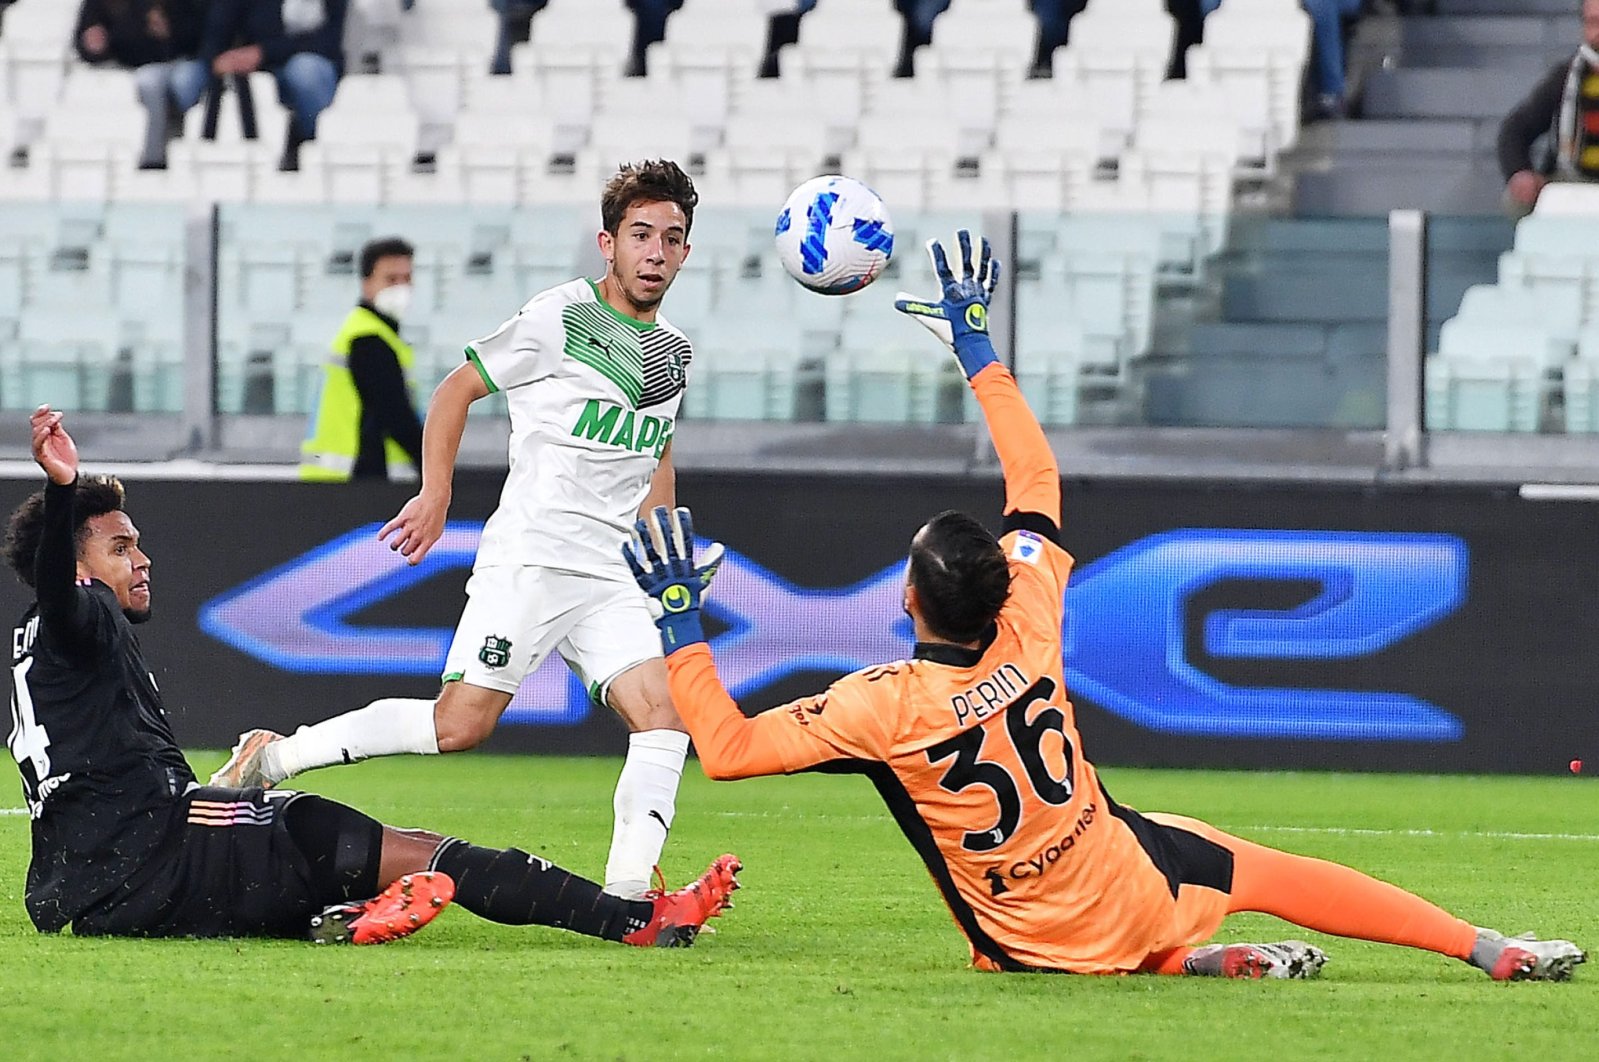 Sassuolo’s Maxime Lopez (C) scores during a Serie A match against Juventus at Allianz Stadium in Turin, Italy, Oct. 27, 2021. (EPA Photo)